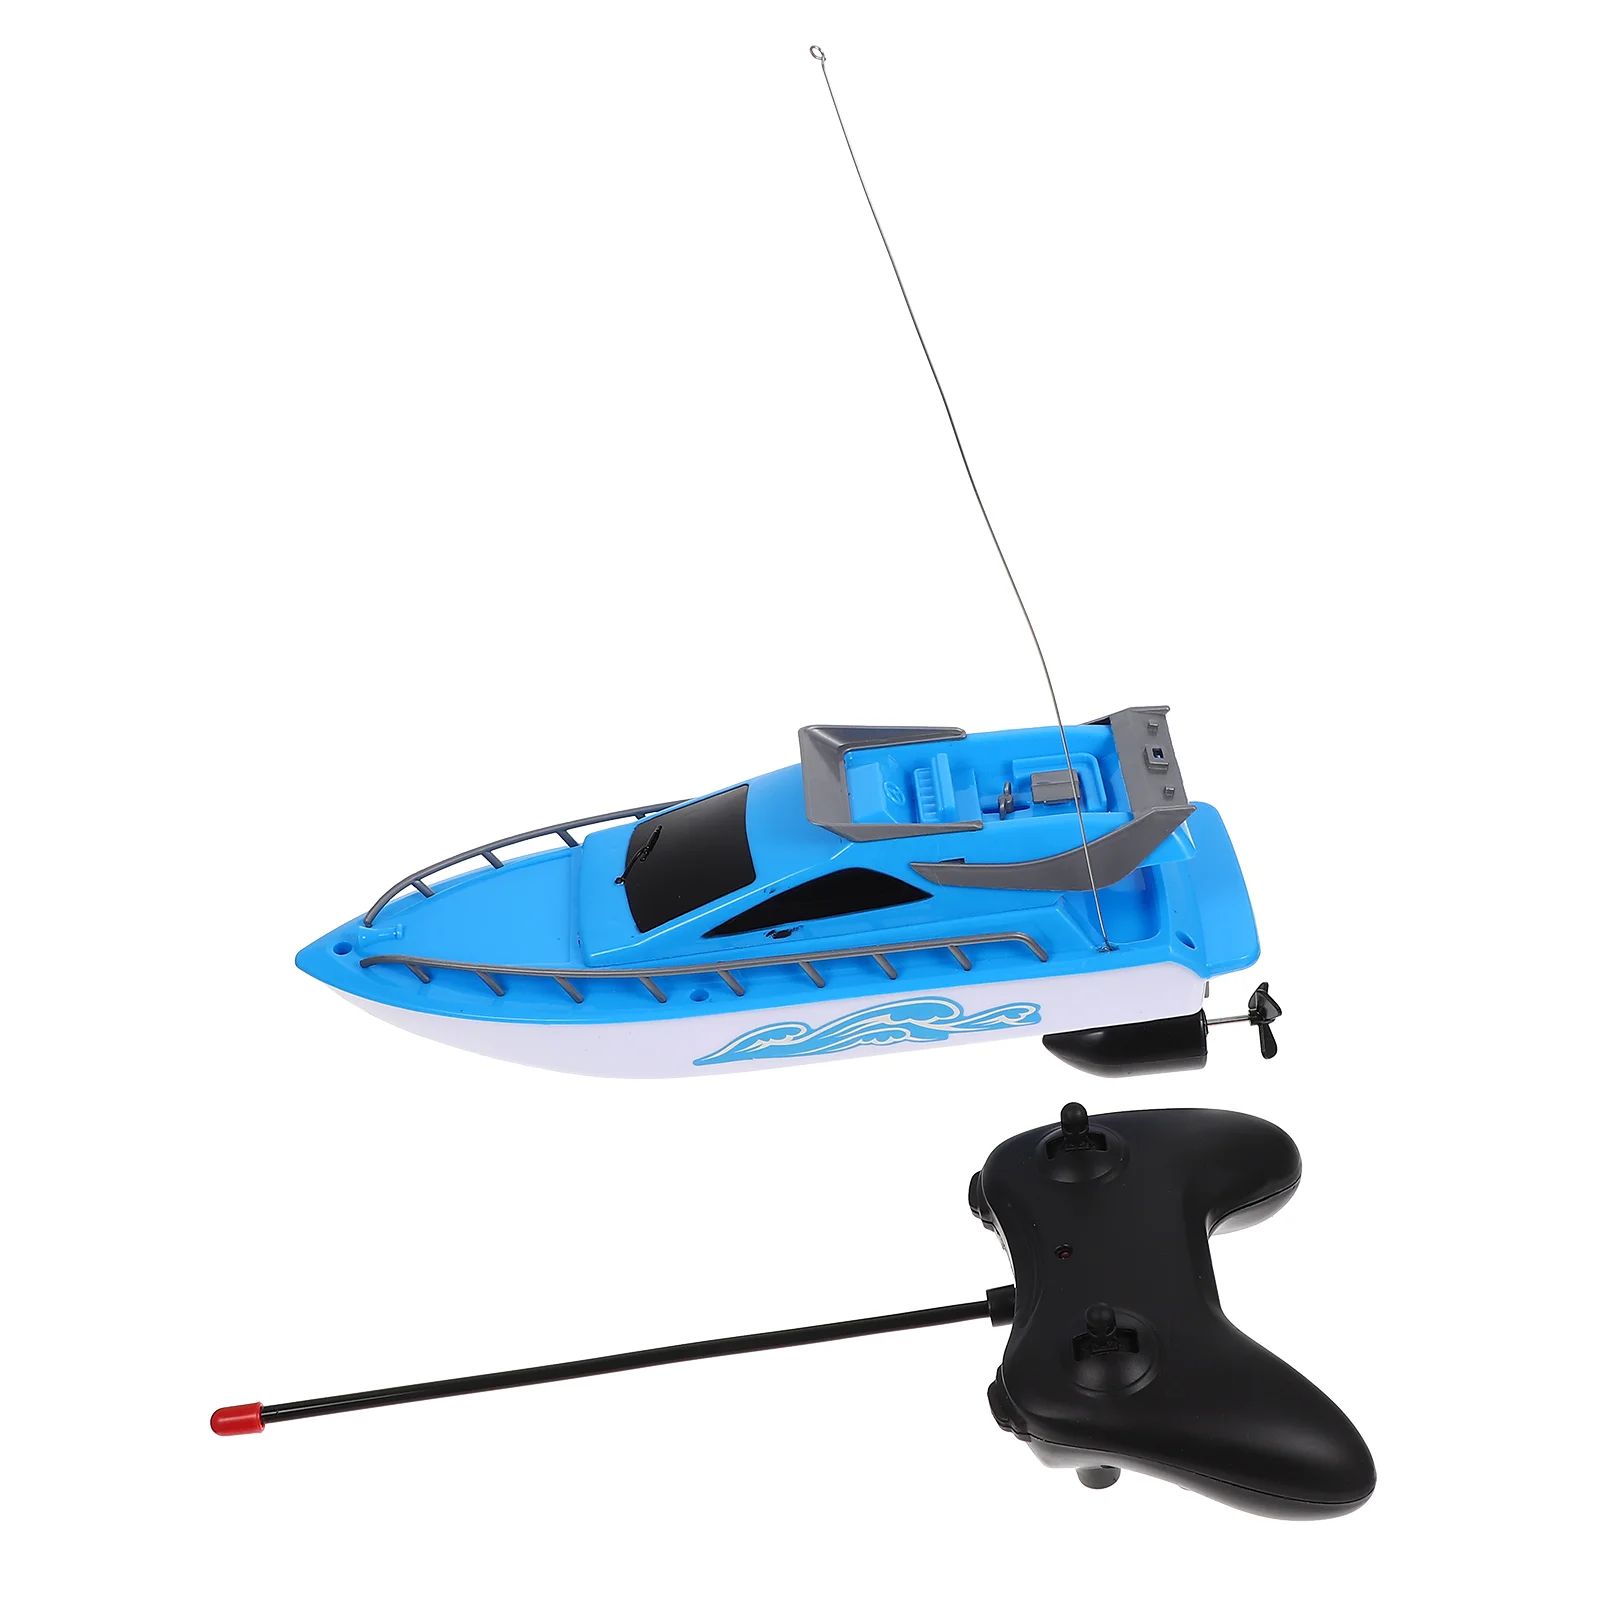 

Boat Toy Rc Toys Kids Racing Pool Speedboat Remote Boats Control Fast Electric Floating Children Beach Velocity Water Bath Mini